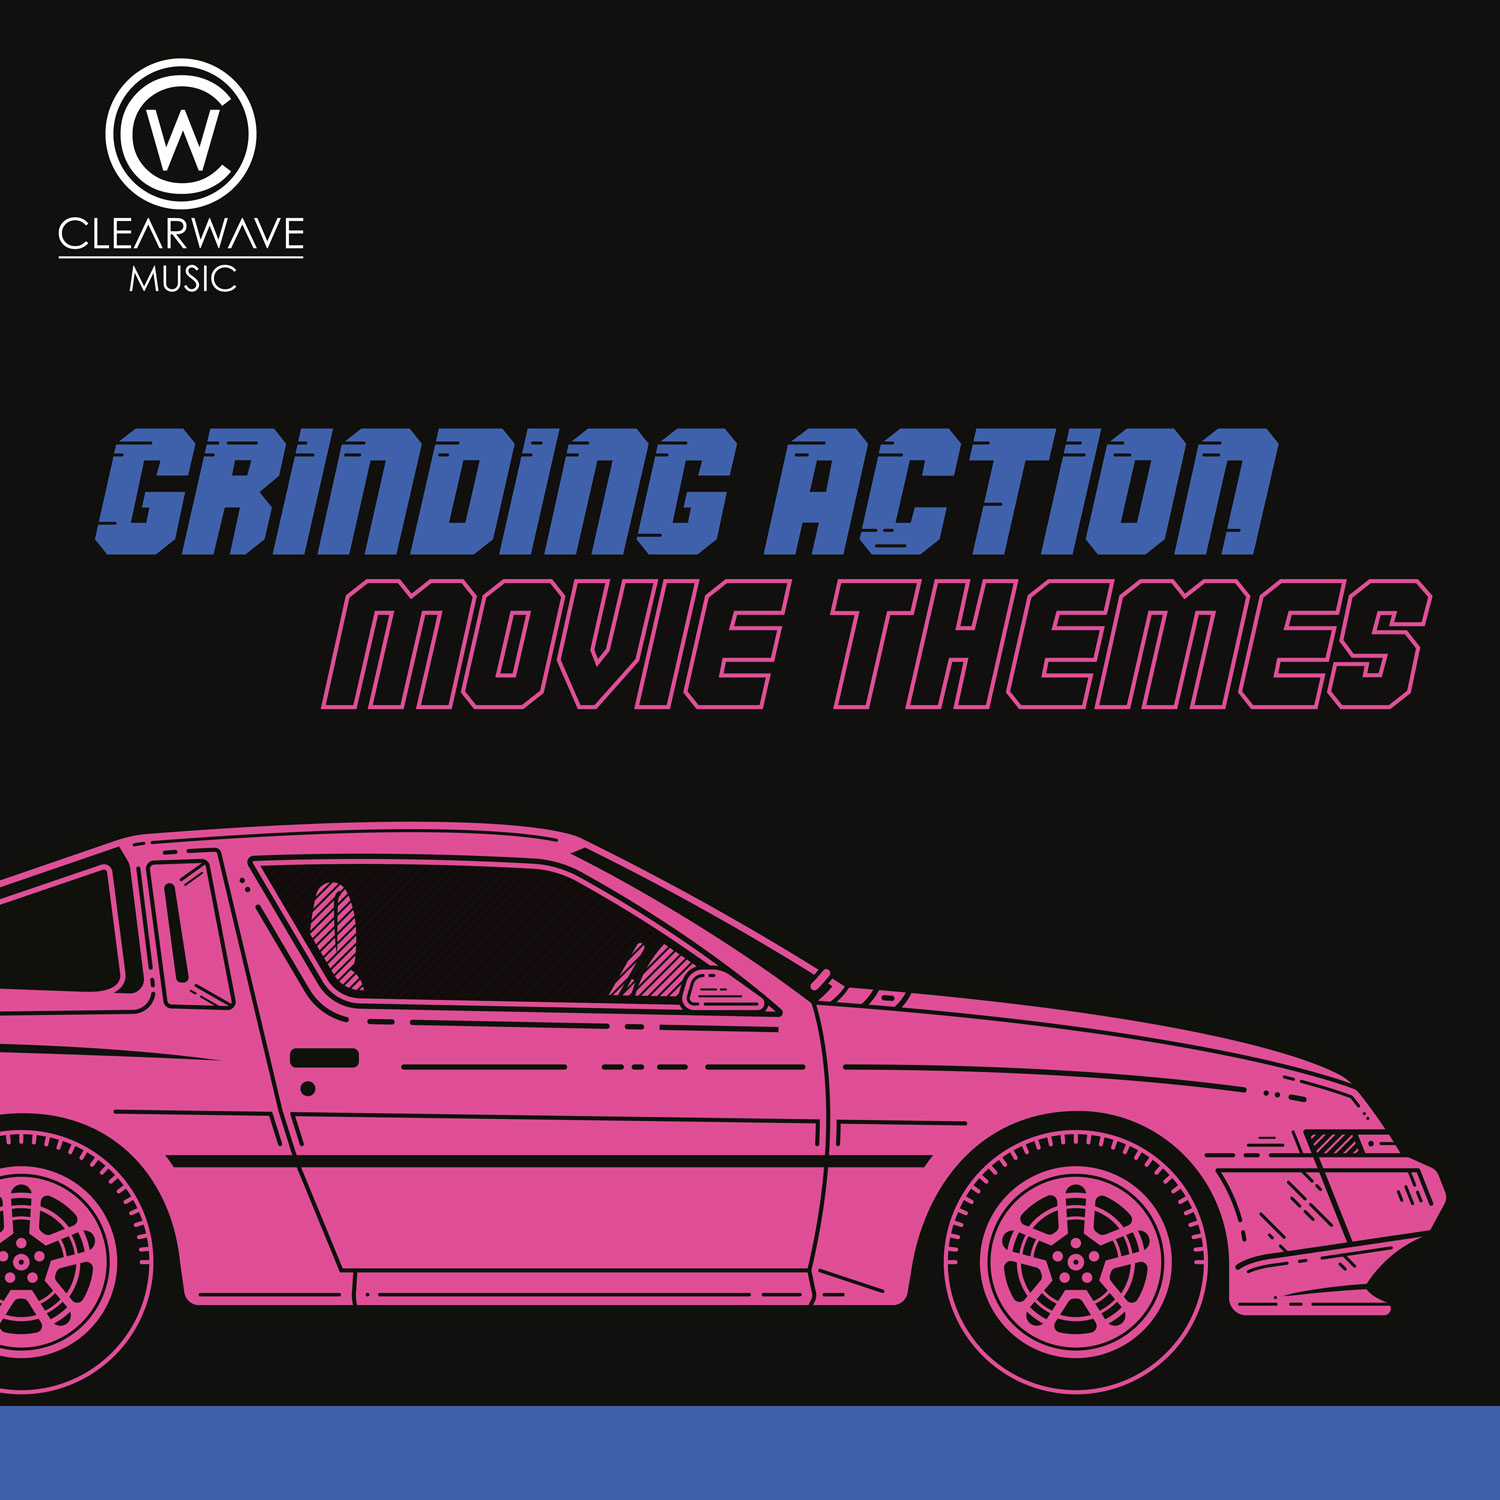 Album Artwork for CWM0125 Grinding Action Movie Themes